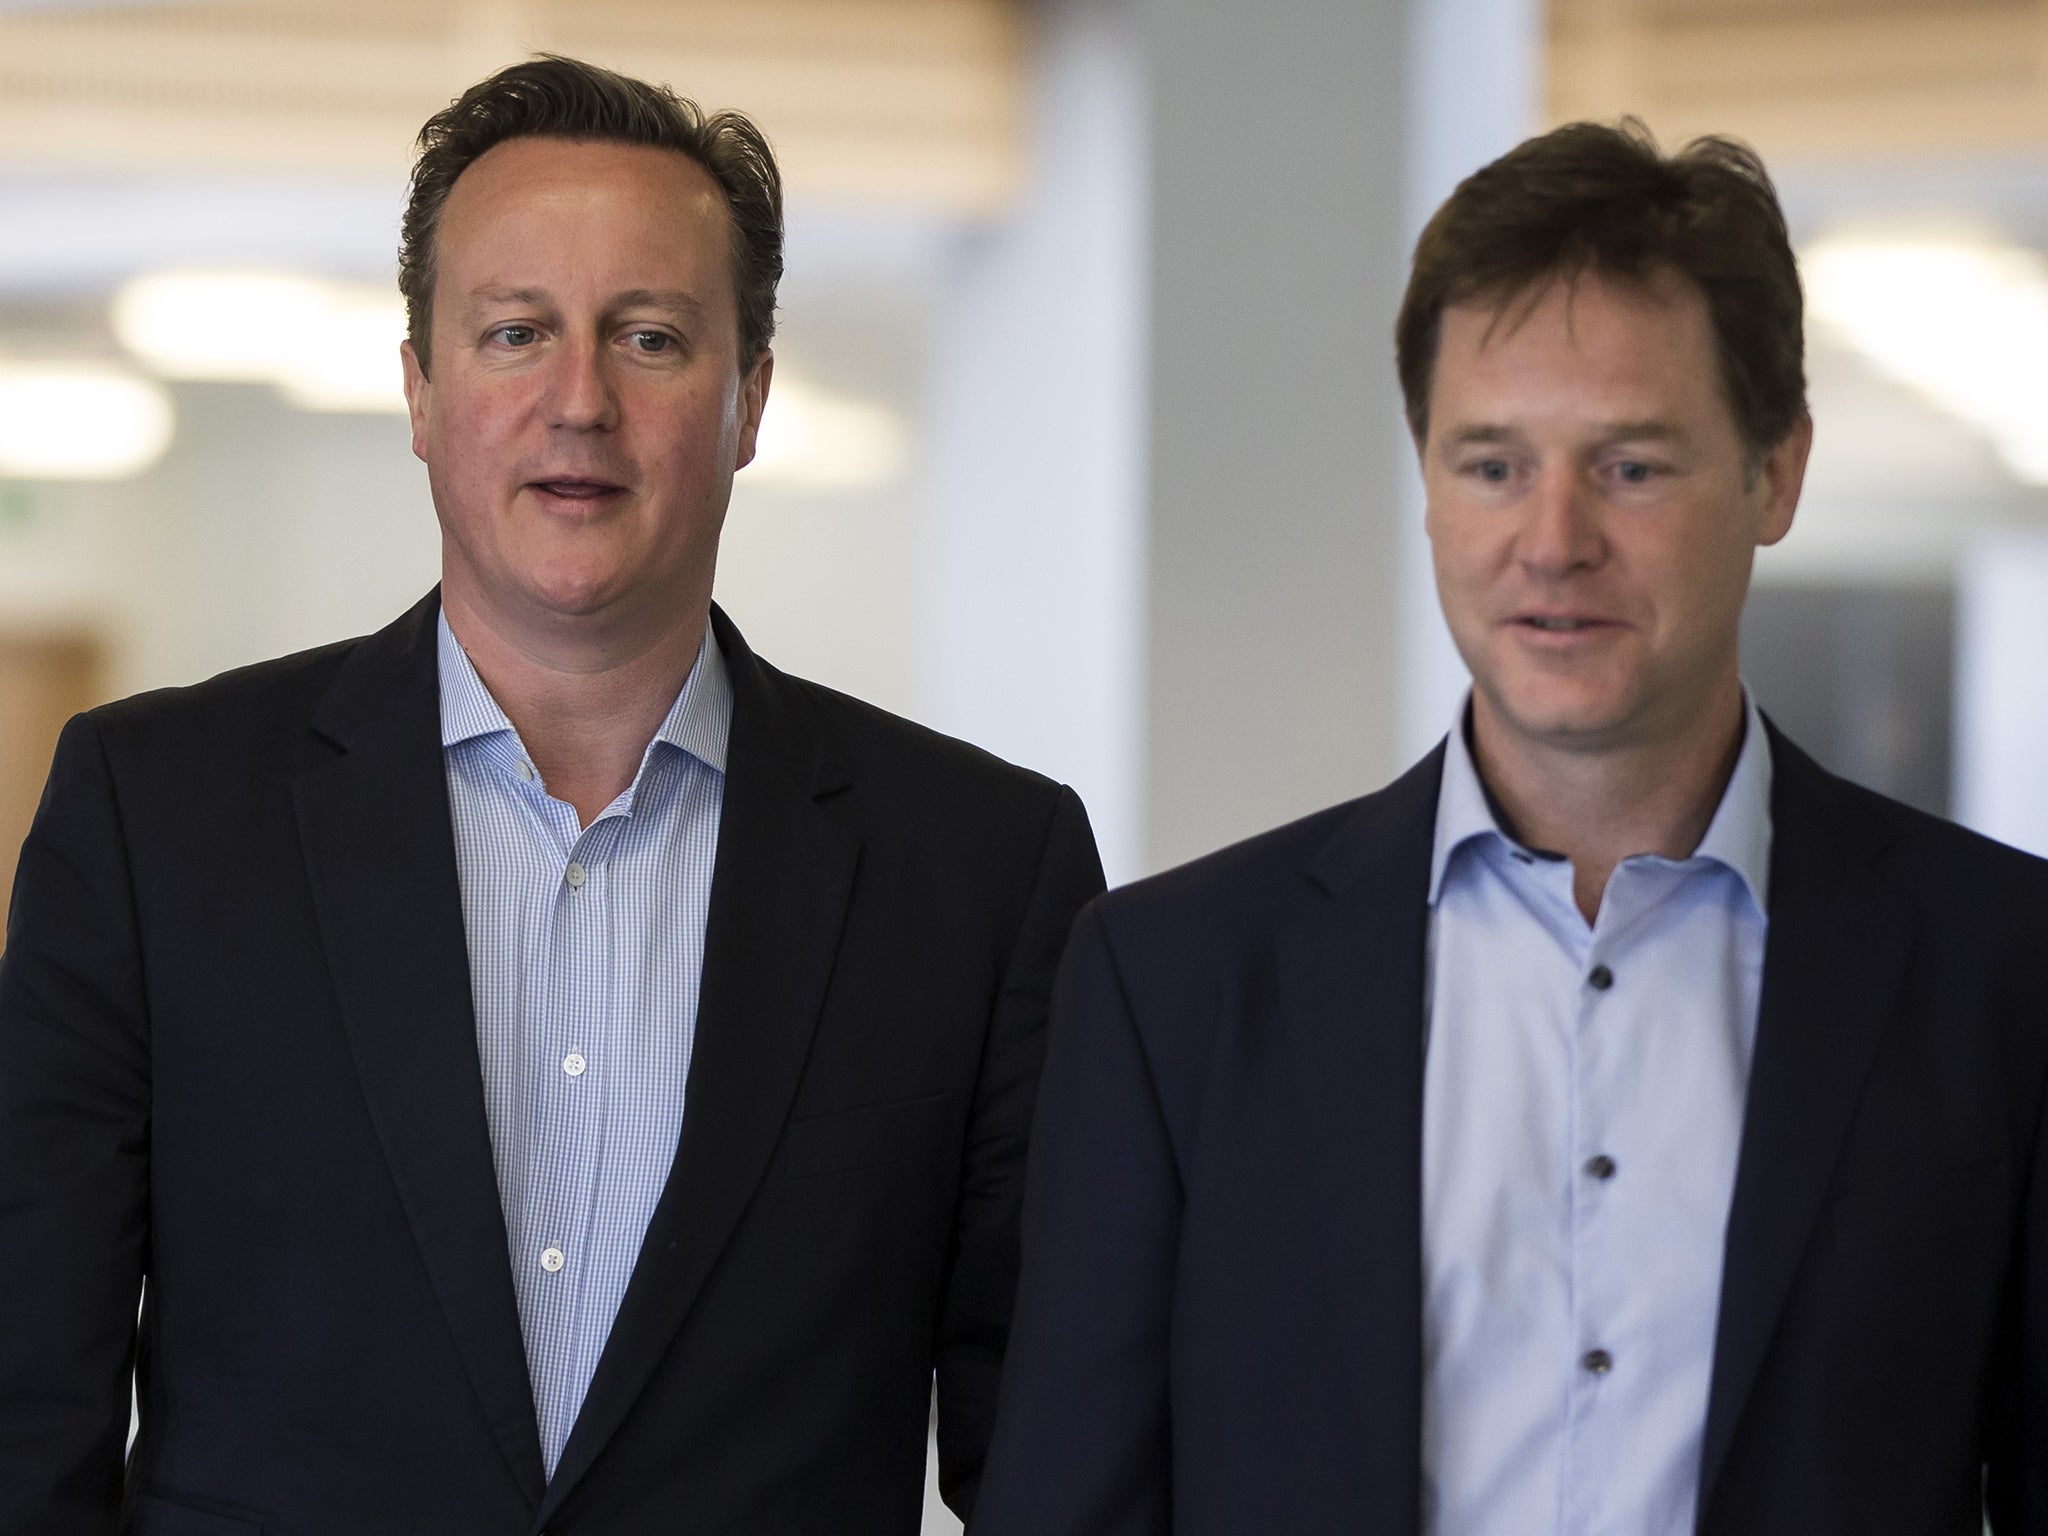 David Cameron has demanded that Nick Clegg should not participate in a BBC programme on 16 April featuring Ed Miliband and other opposition leaders